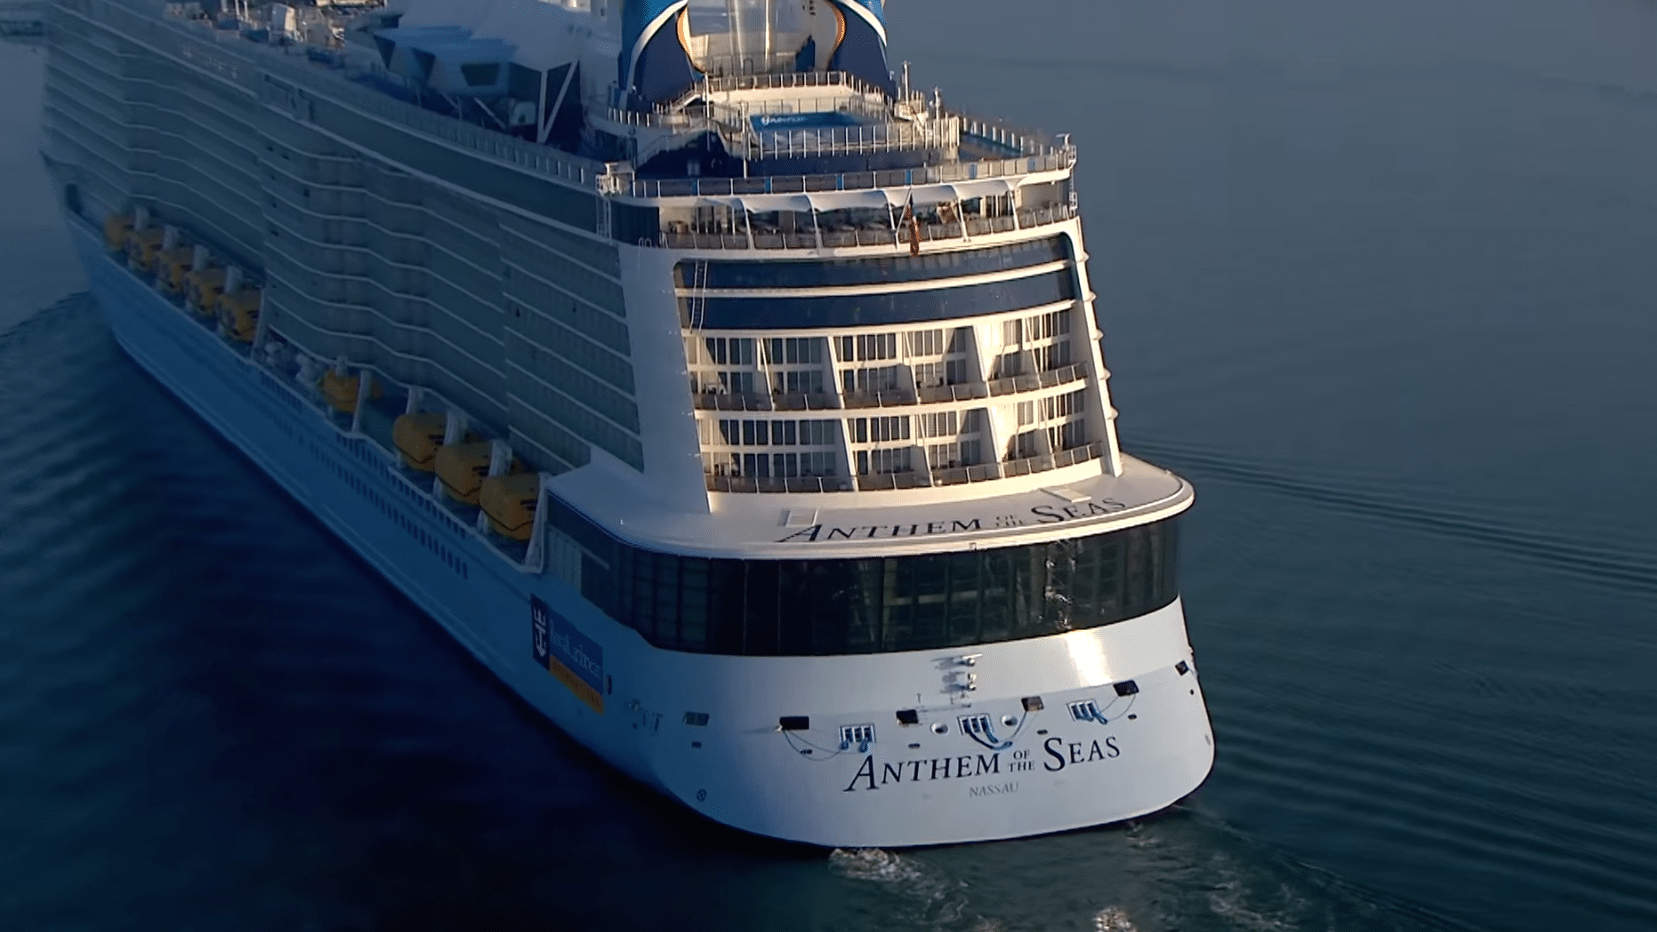 Royal Caribbean released a video to introduce one of its newest ships that leave from New York.